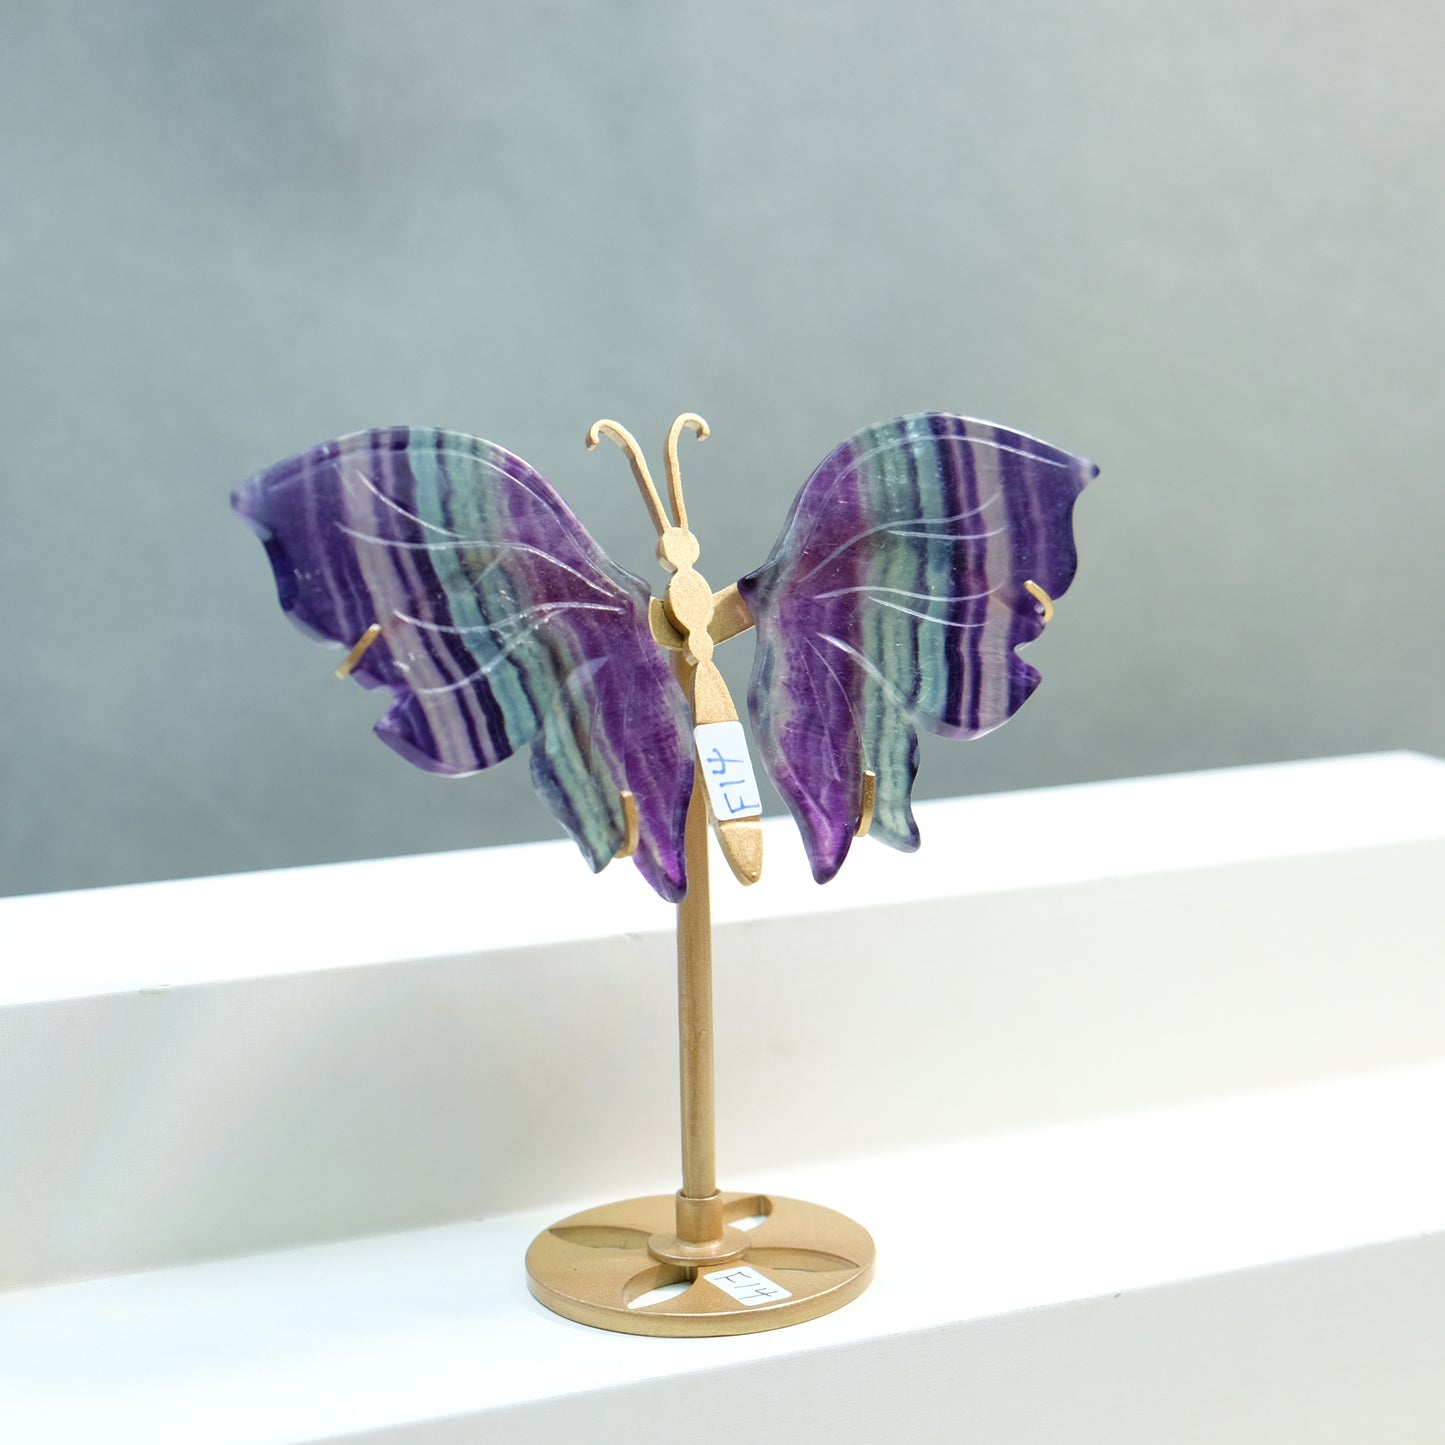 [Wholesale Price]Exquisite Rainbow Fluorite Crystal Butterfly Wings One of A Kind Pieces (Copy)